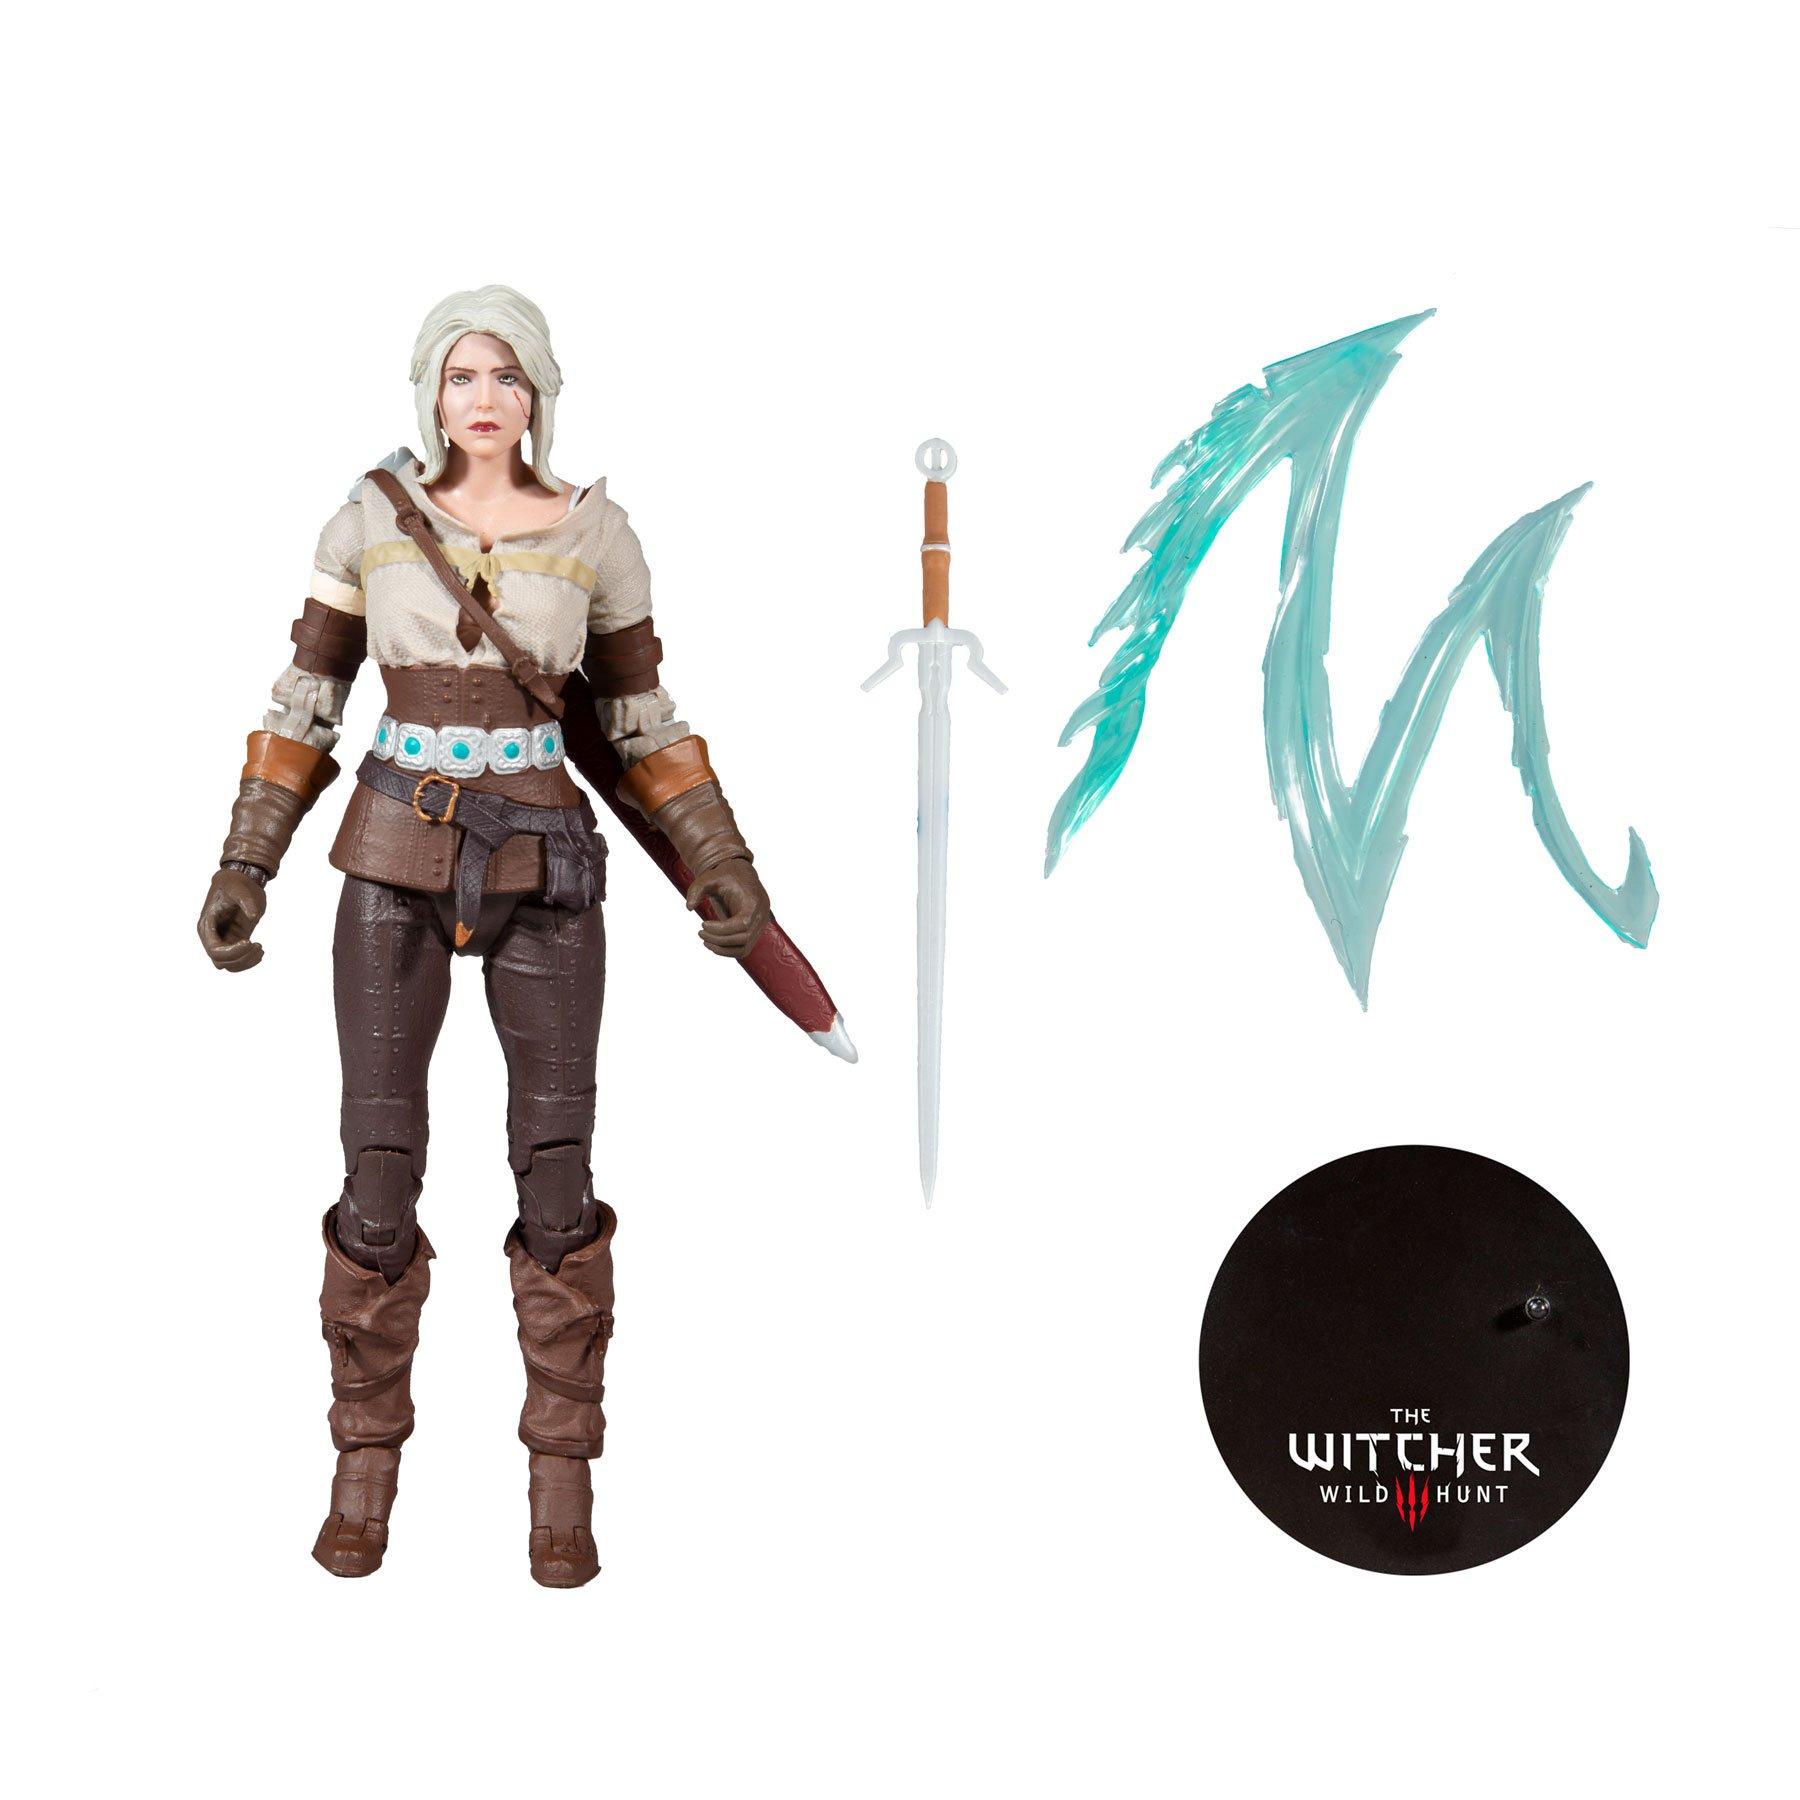 McFarlane Toys The Witcher Ciri Wave 2 7-in Action Figure